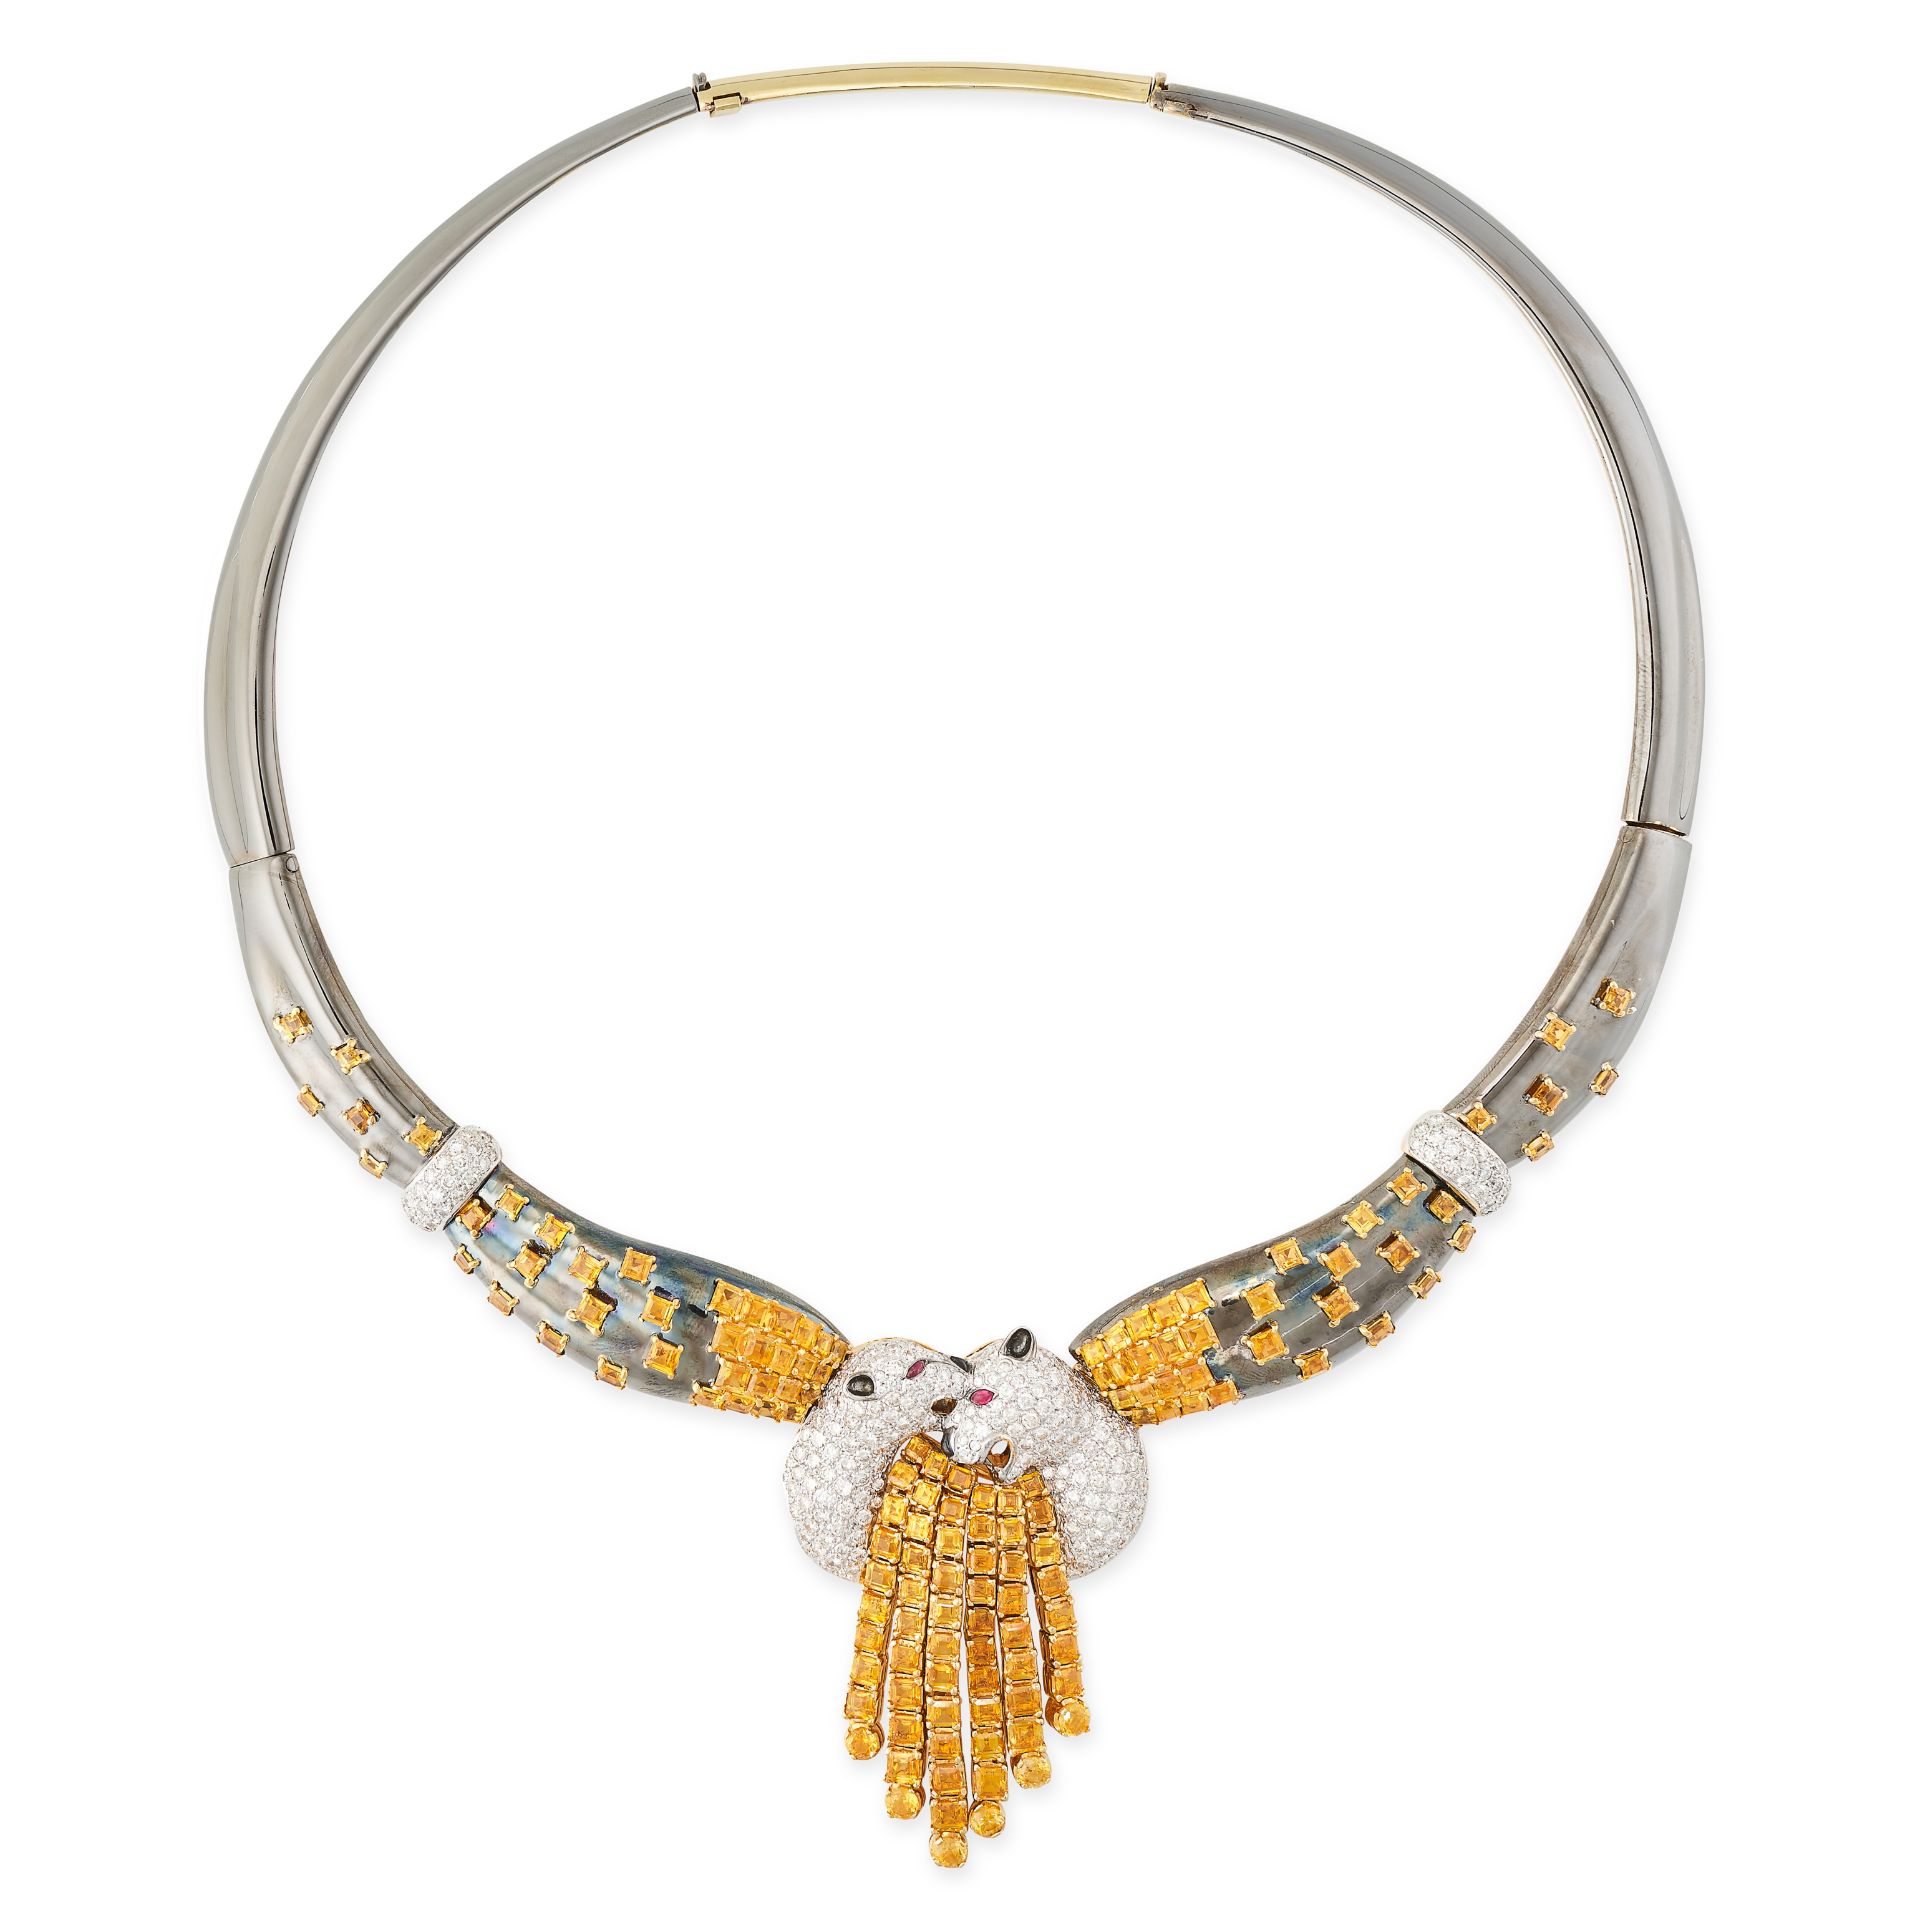 A YELLOW SAPPHIRE, DIAMOND AND RUBY PANTHER COLLAR NECKLACE comprising a blackened gold collar set